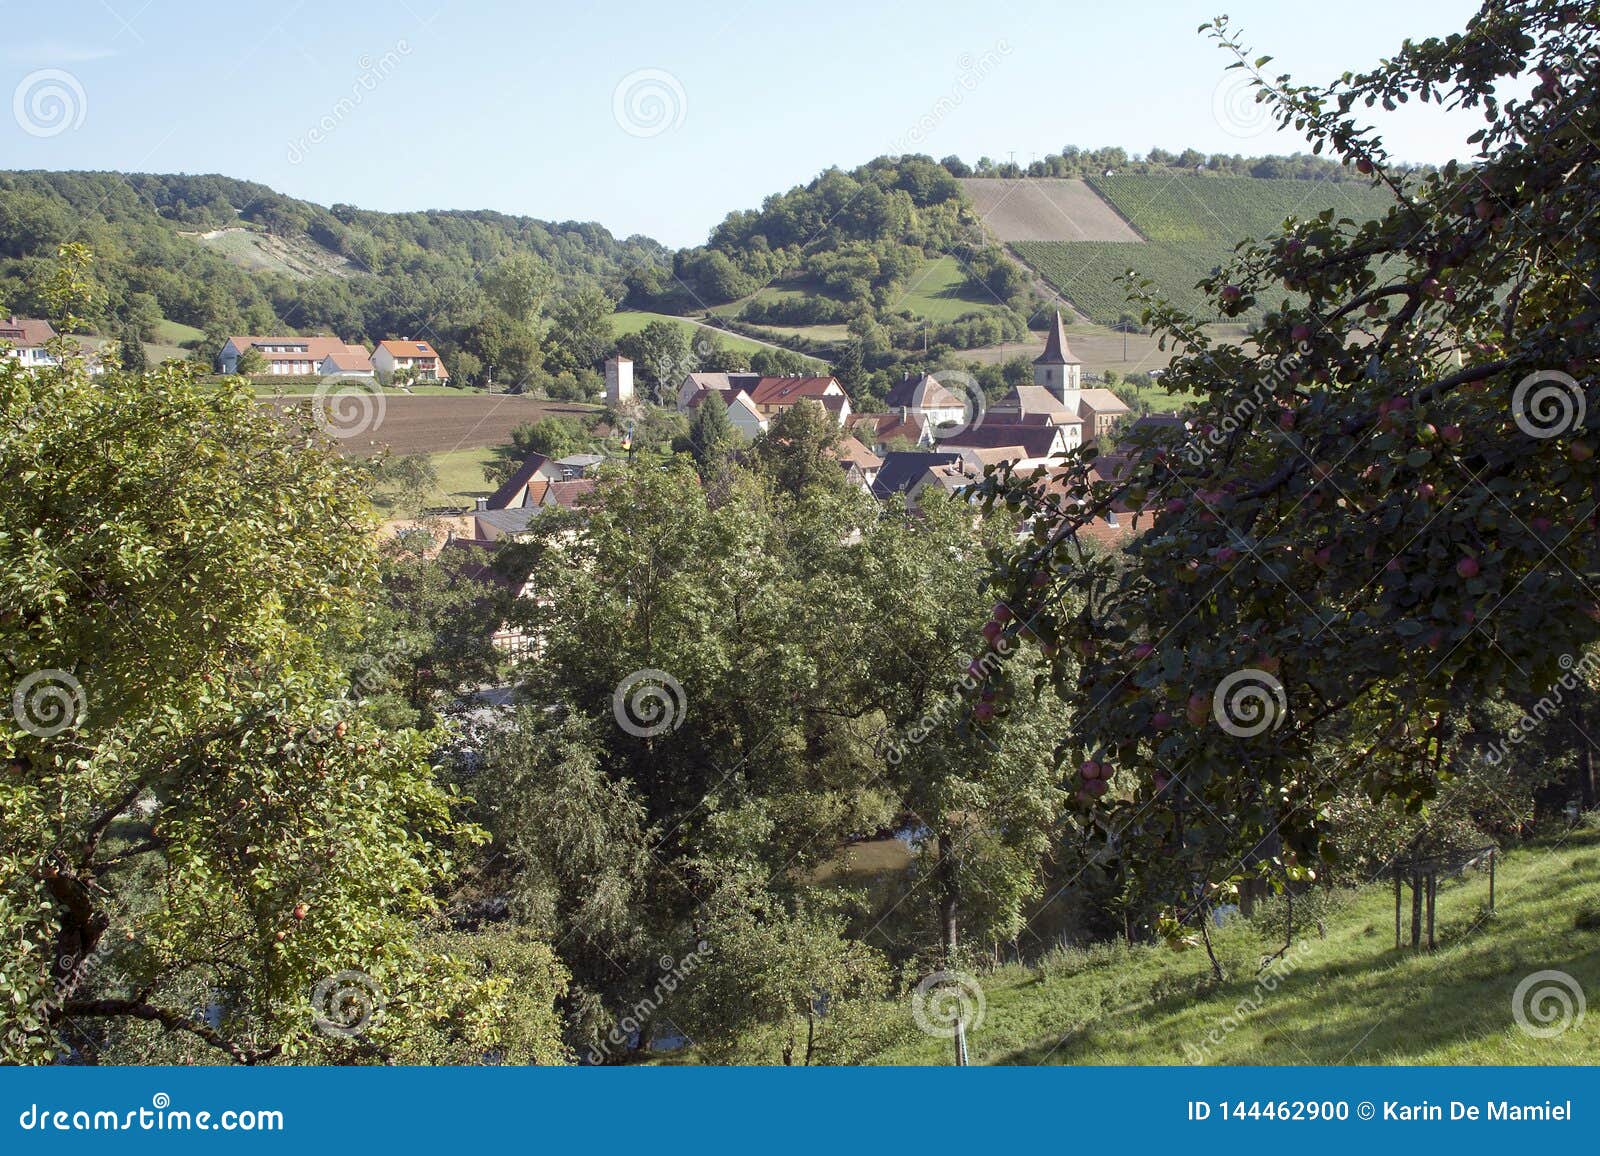 rural village with plowed fields and apple orchards